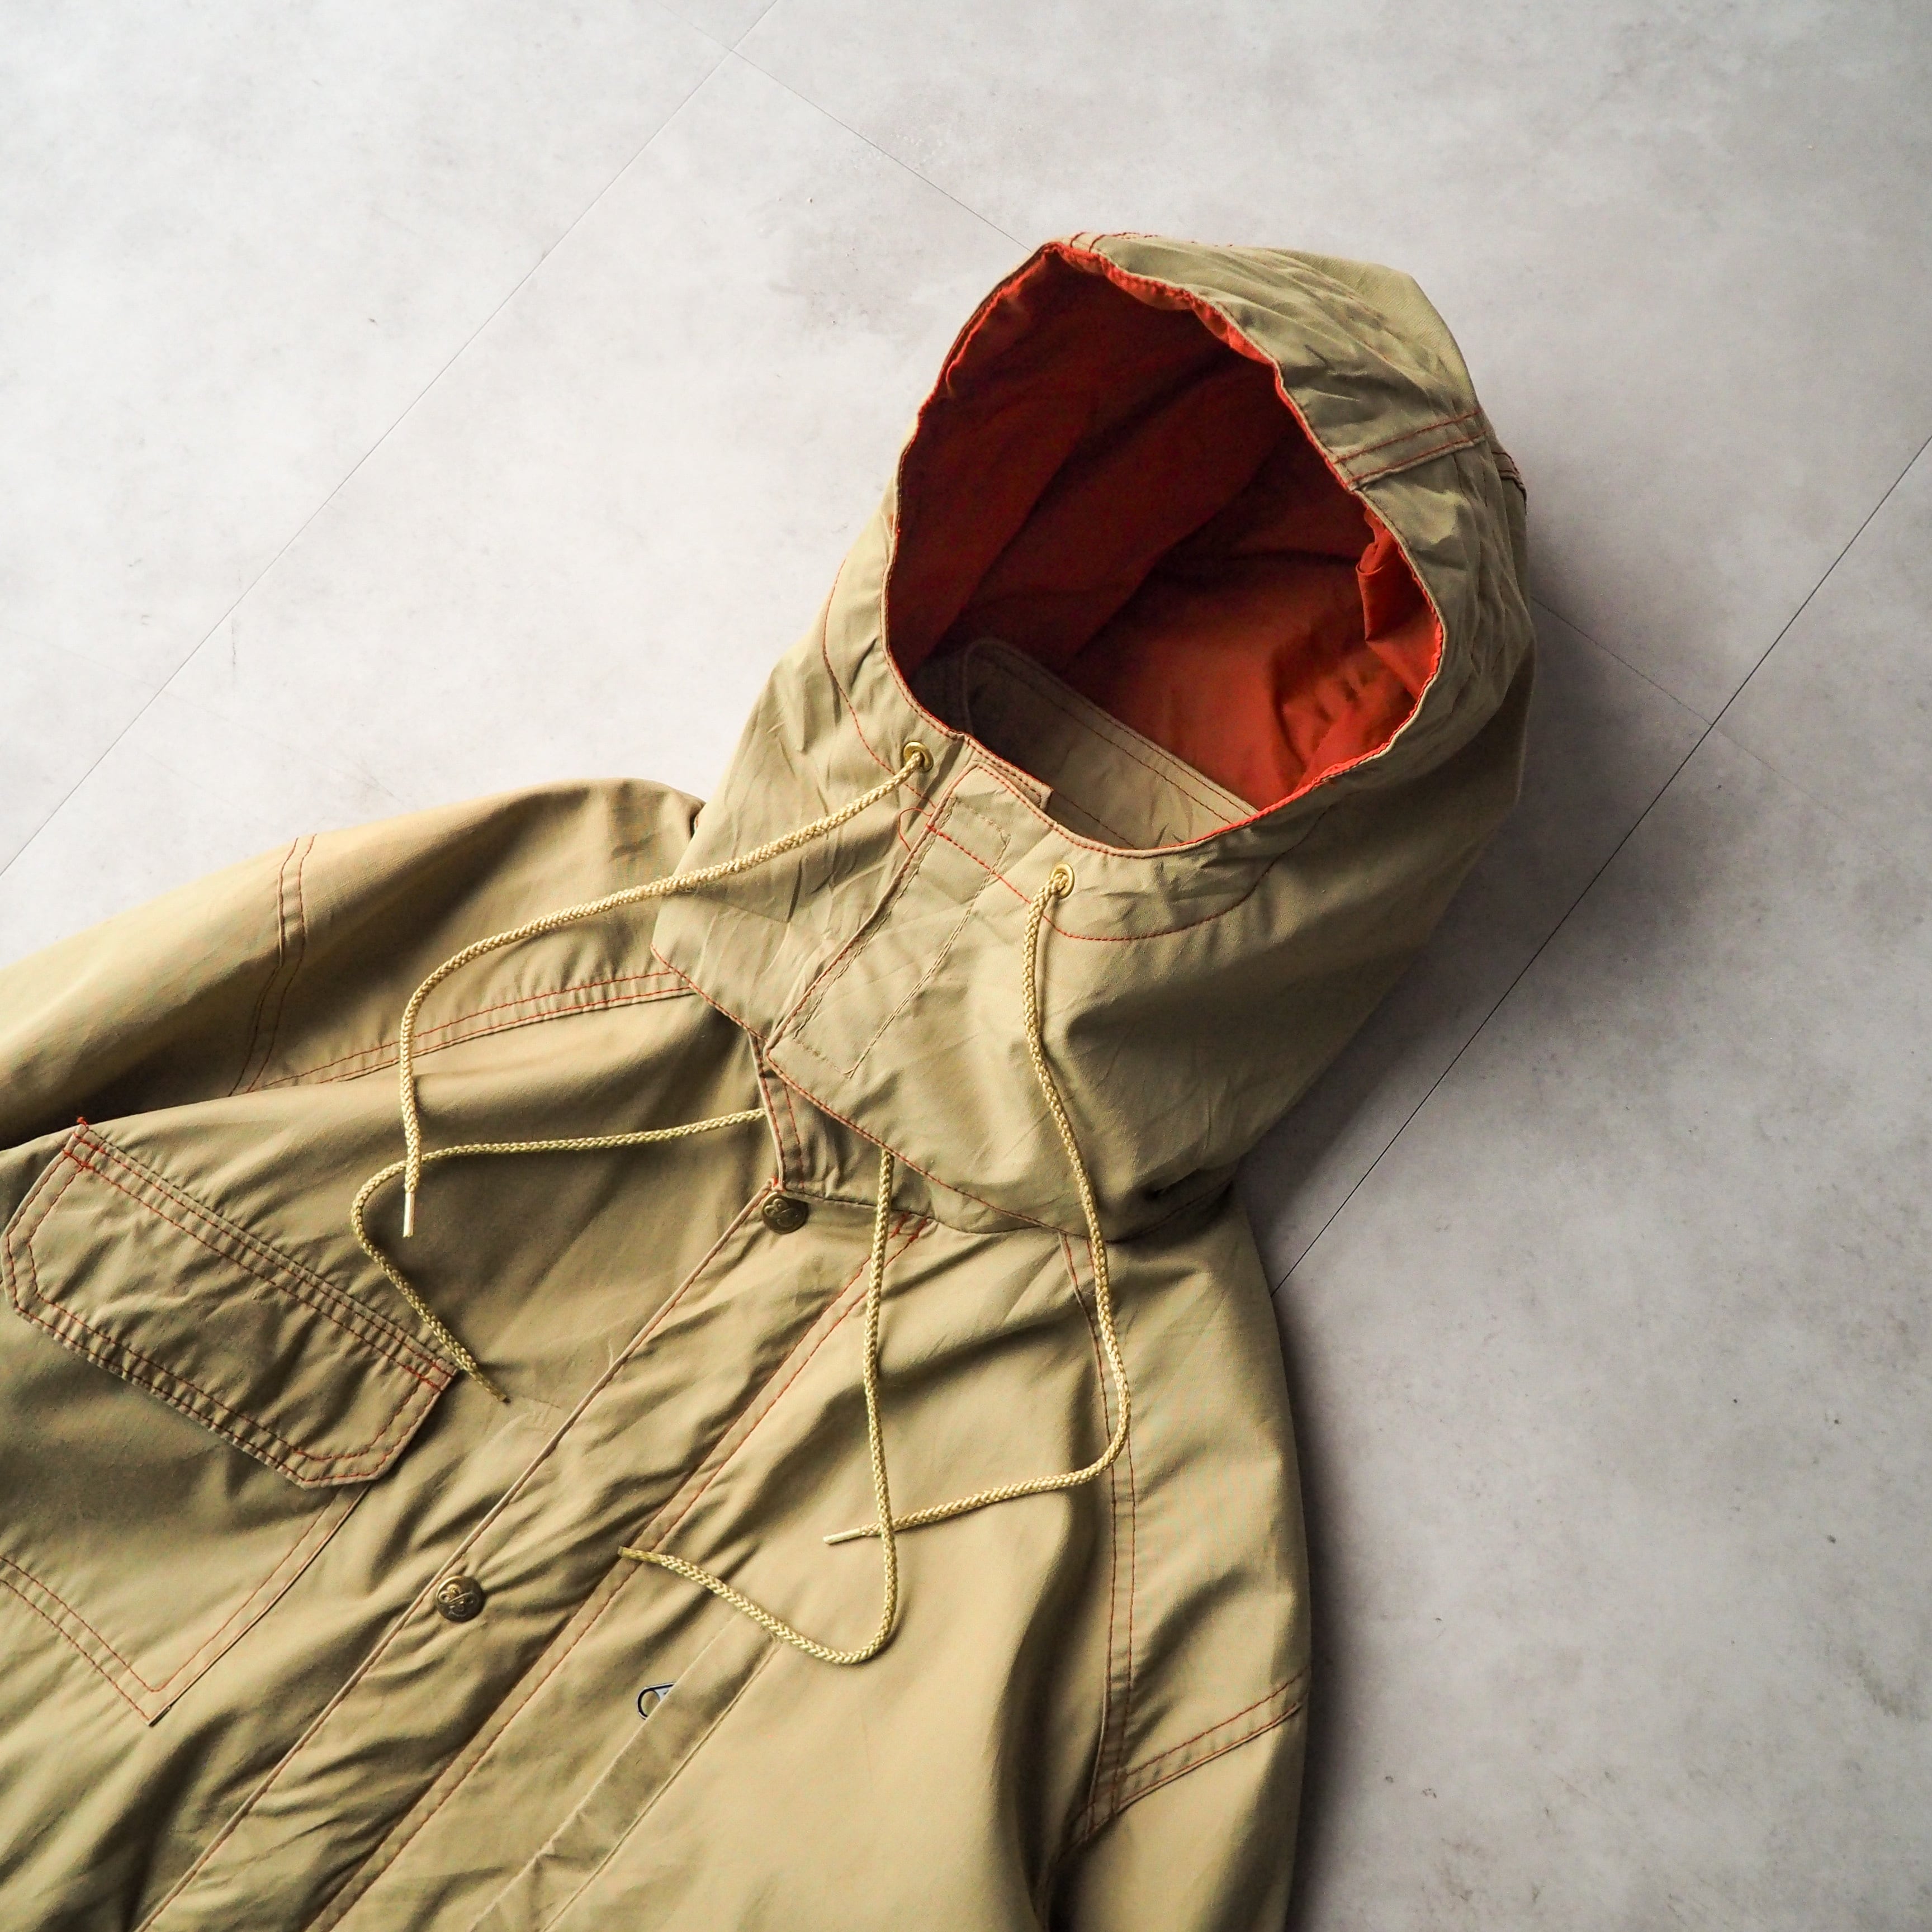 70s-80s “EDDIE BAUER” - storm shed - mountain parka made in USA 70